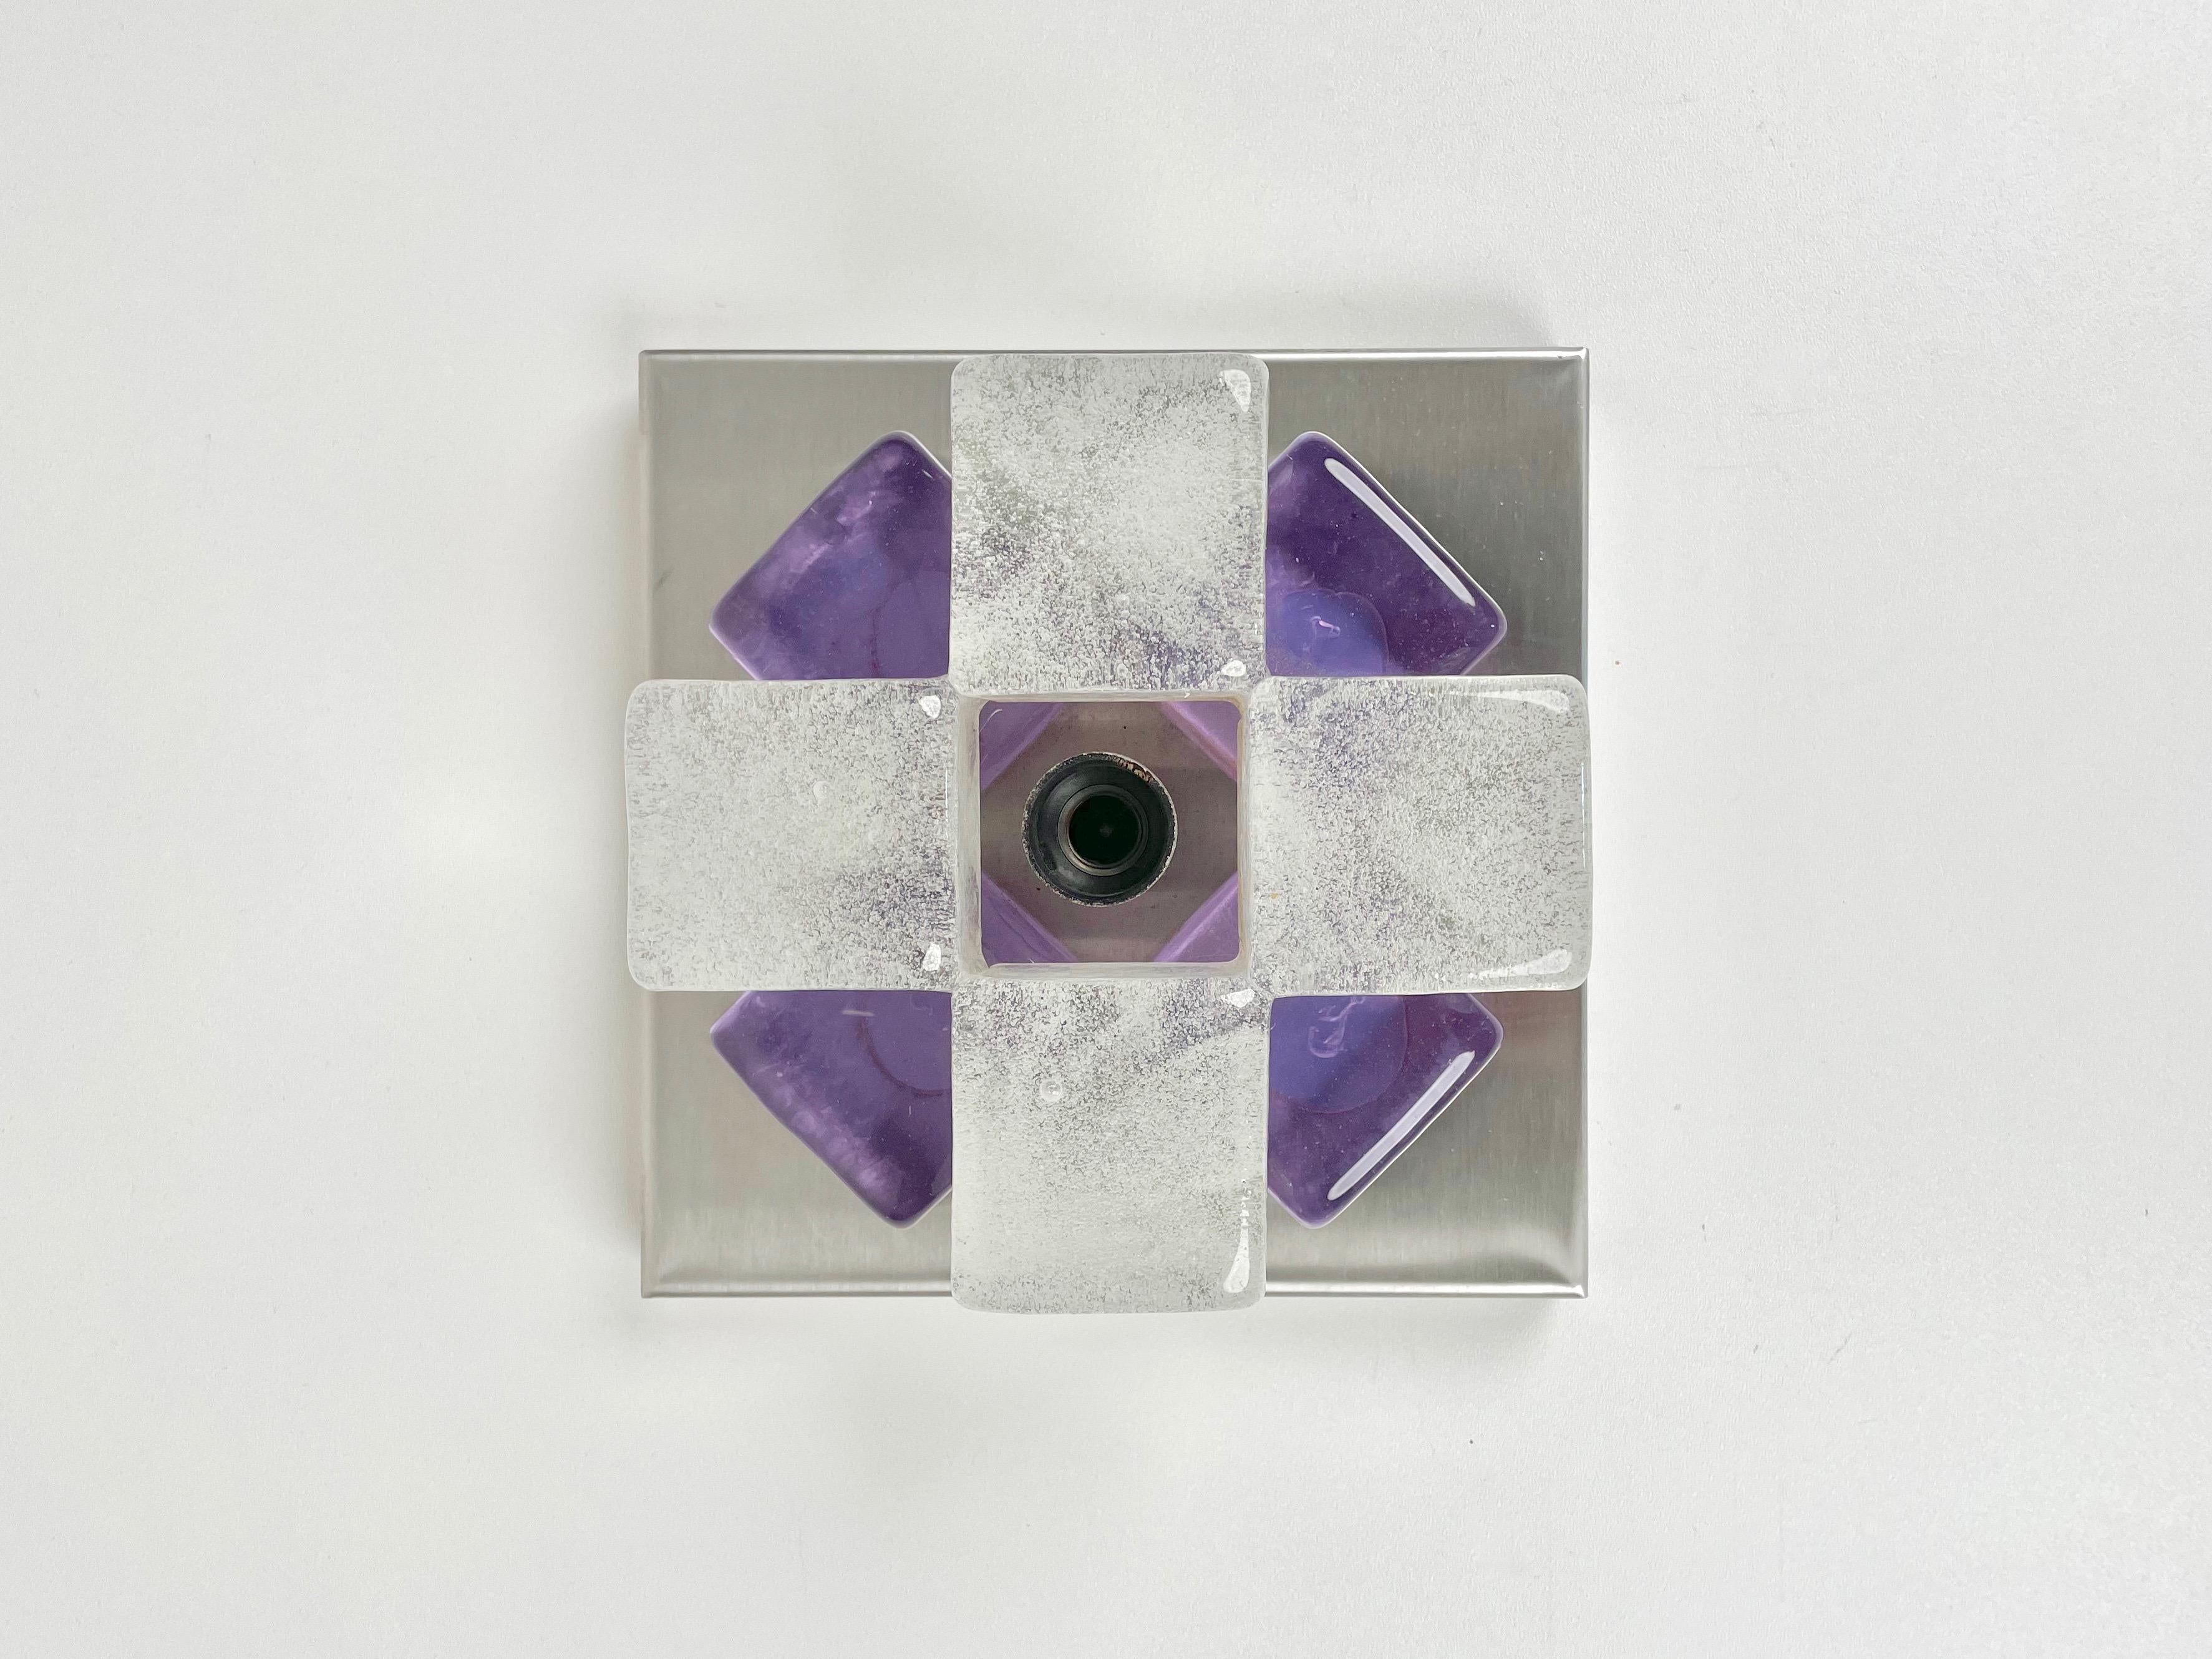 Squared applique wall lamp by Albano Poli for Poliarte in violet and white Murano glass on steel base made in Italy in the 1970s.